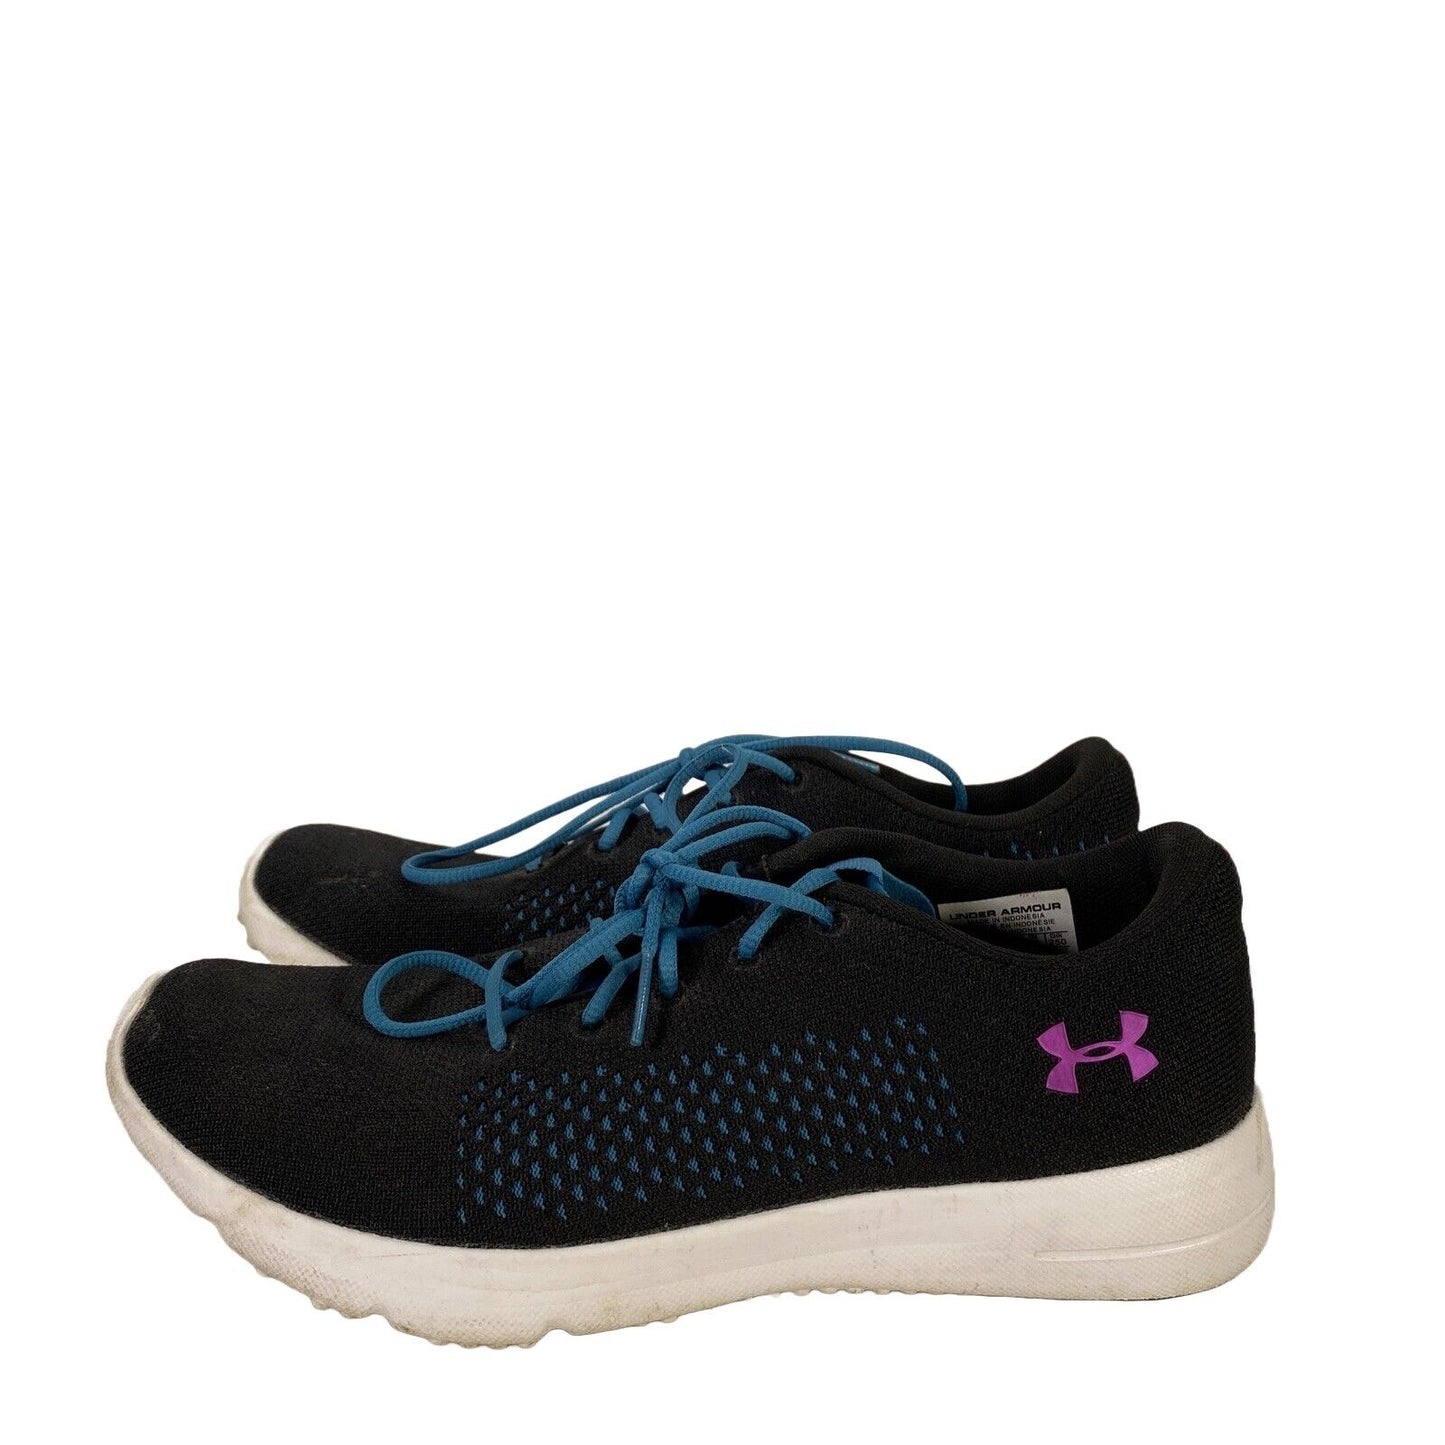 Under Armour Women's Black/Blue Rapid Mesh Lace Up Running Shoes - 8